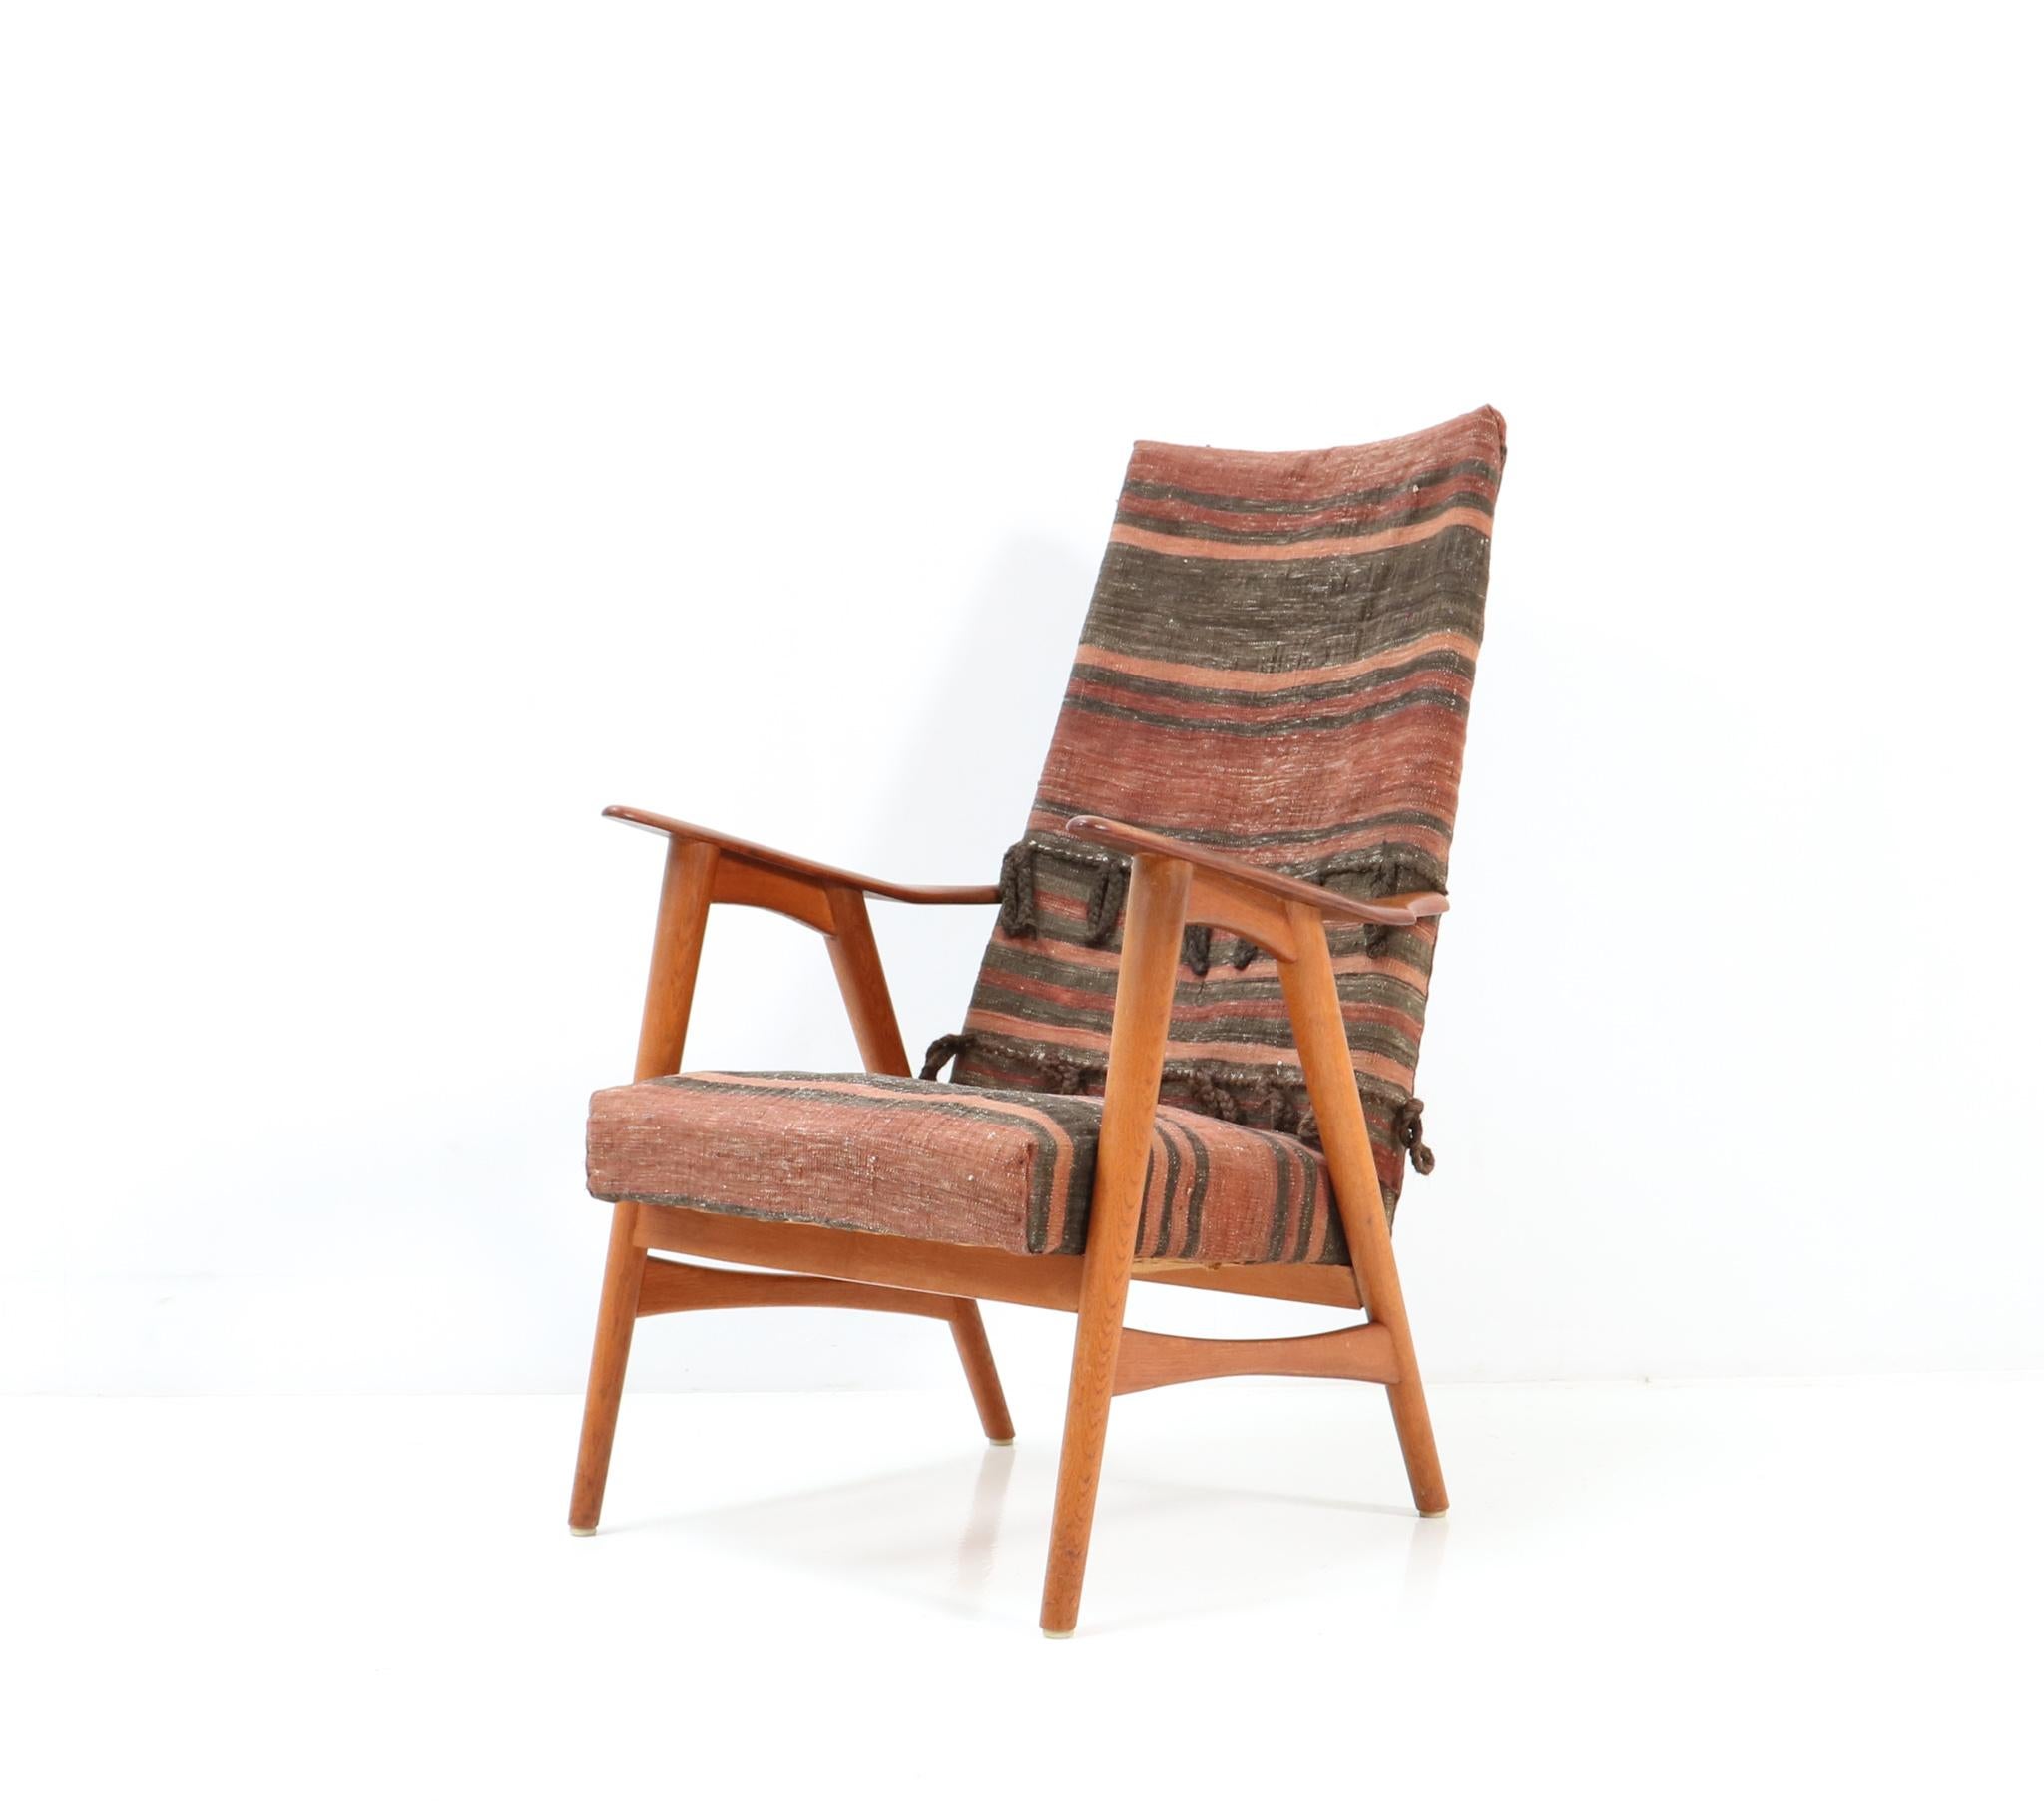 Stunning Mid-Century Modern lounge chair.
Striking Dutch design from the 1960s.
Solid teak frame with Kilim upholstery.
This wonderful Mid-Century Modern lounge chair
is in very good condition with a beautiful patina.